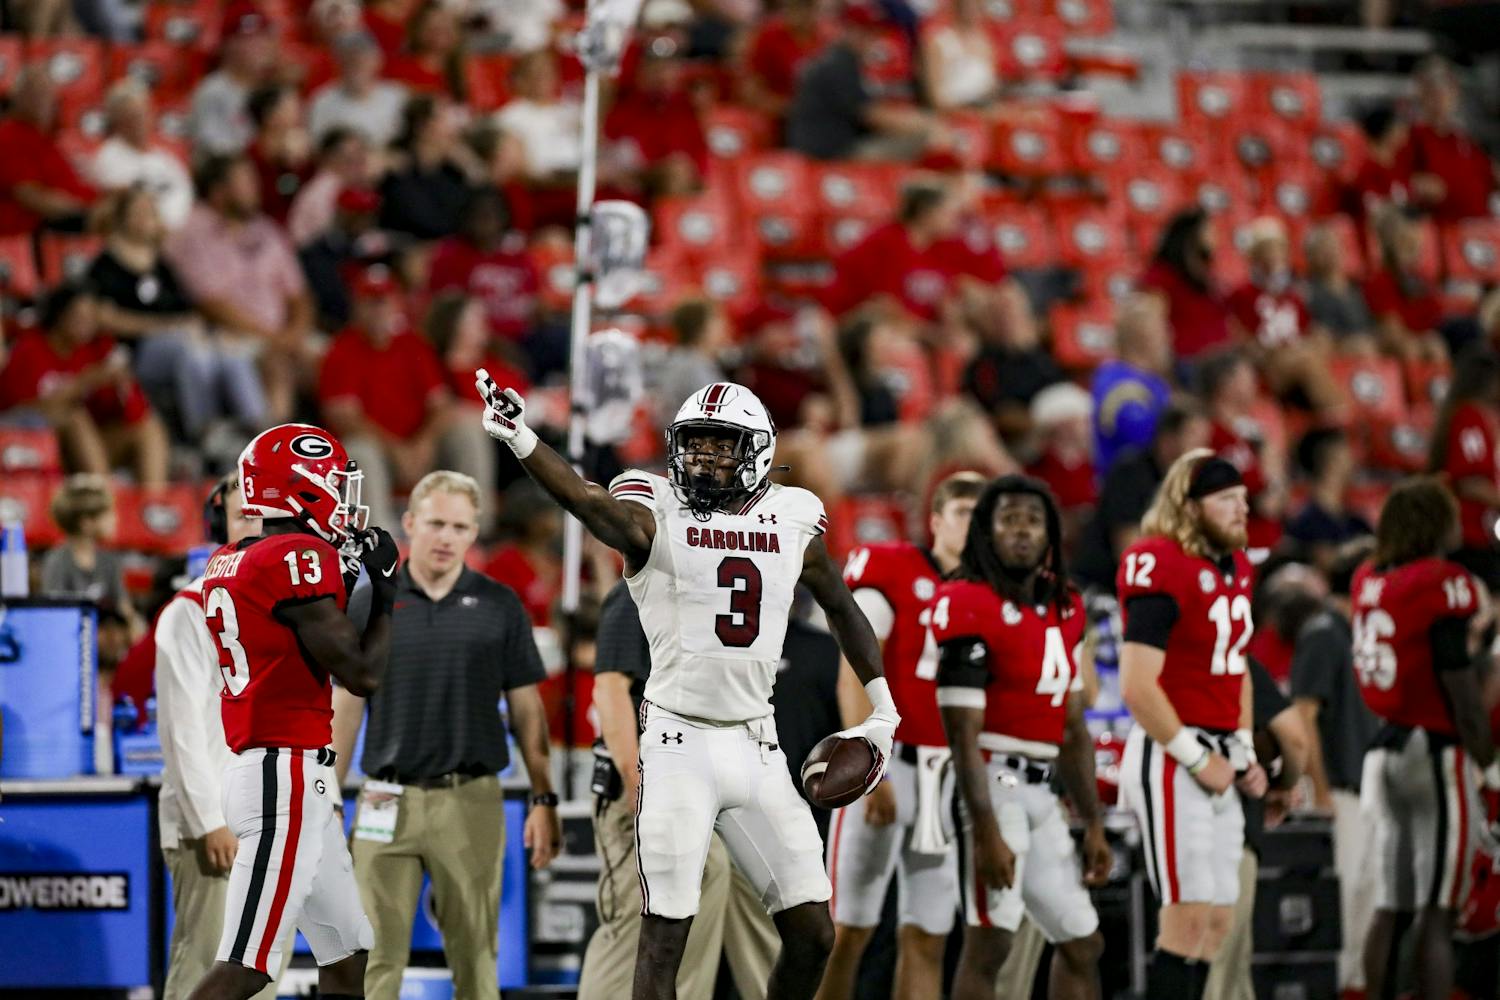 Senior wide receiver Jalen Brooks celebrates a one-handed catch in the fourth quarter of South Carolina's game against Georgia on Sept. 18, 2021.